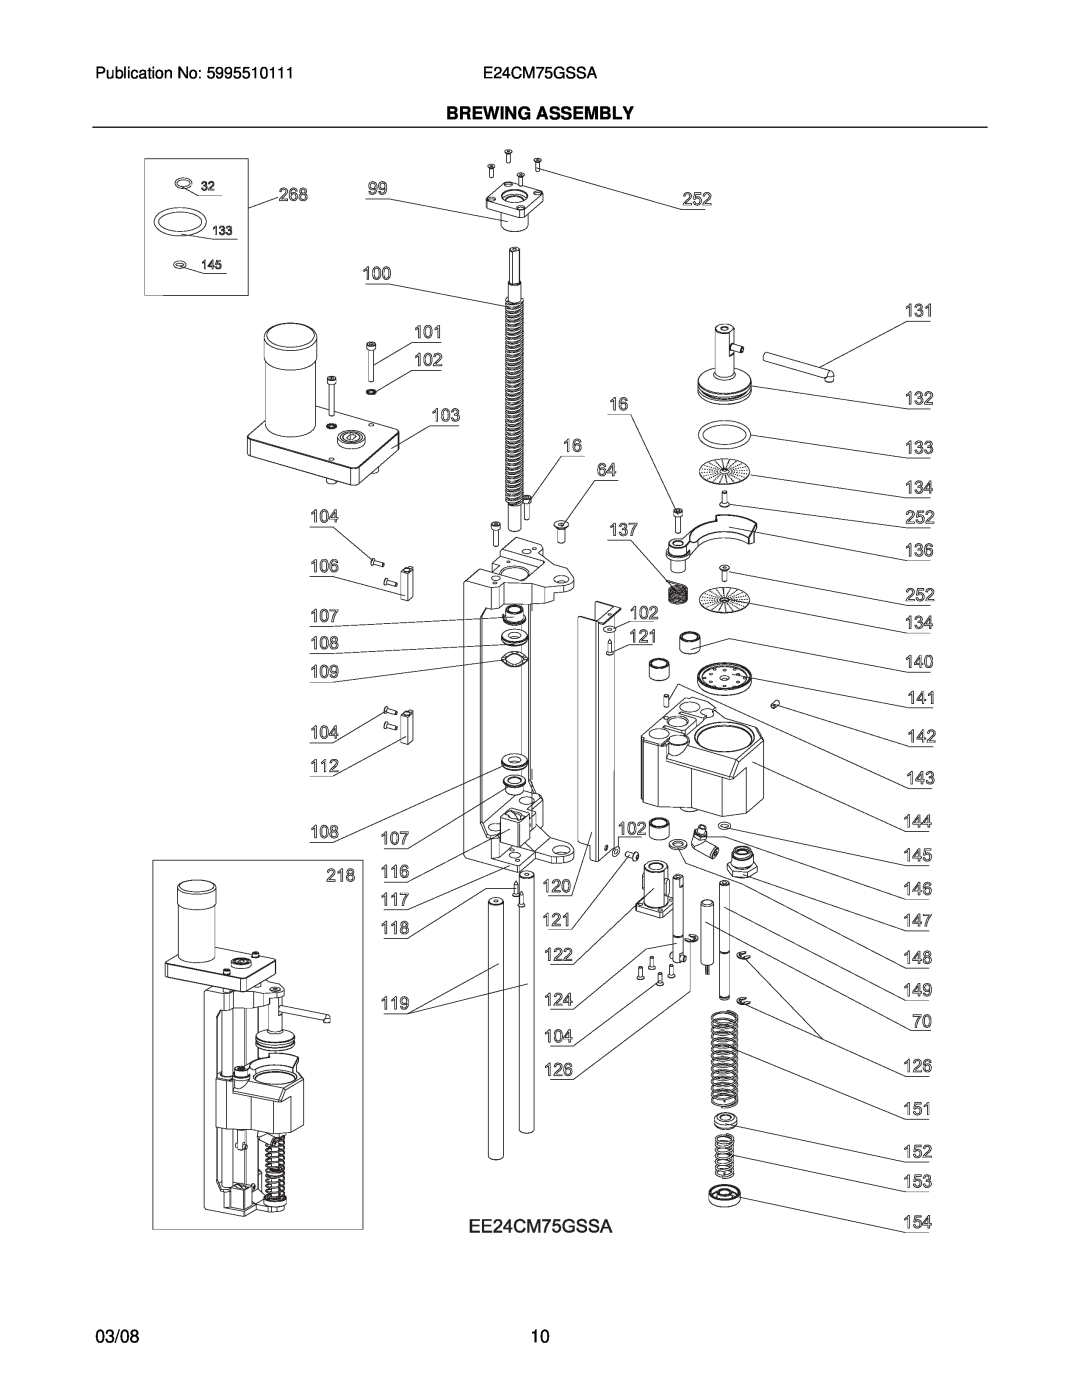 Electrolux E24CM75GSSA installation instructions Brewing Assembly, 03/08 